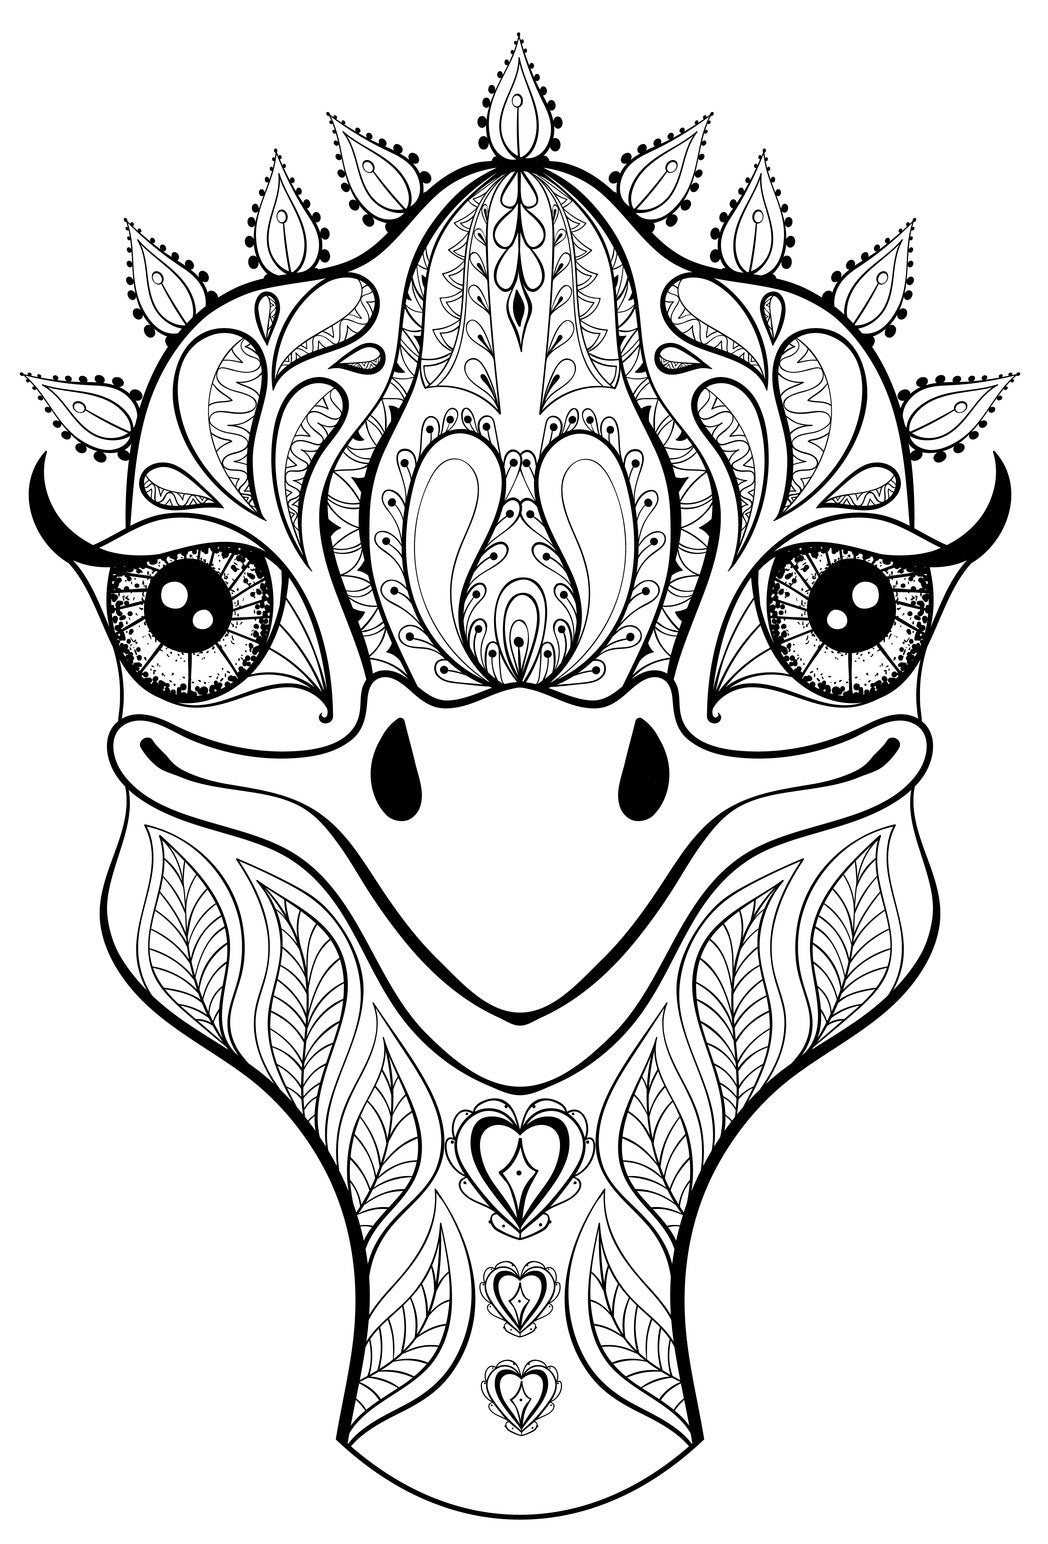 ostrich coloring pages